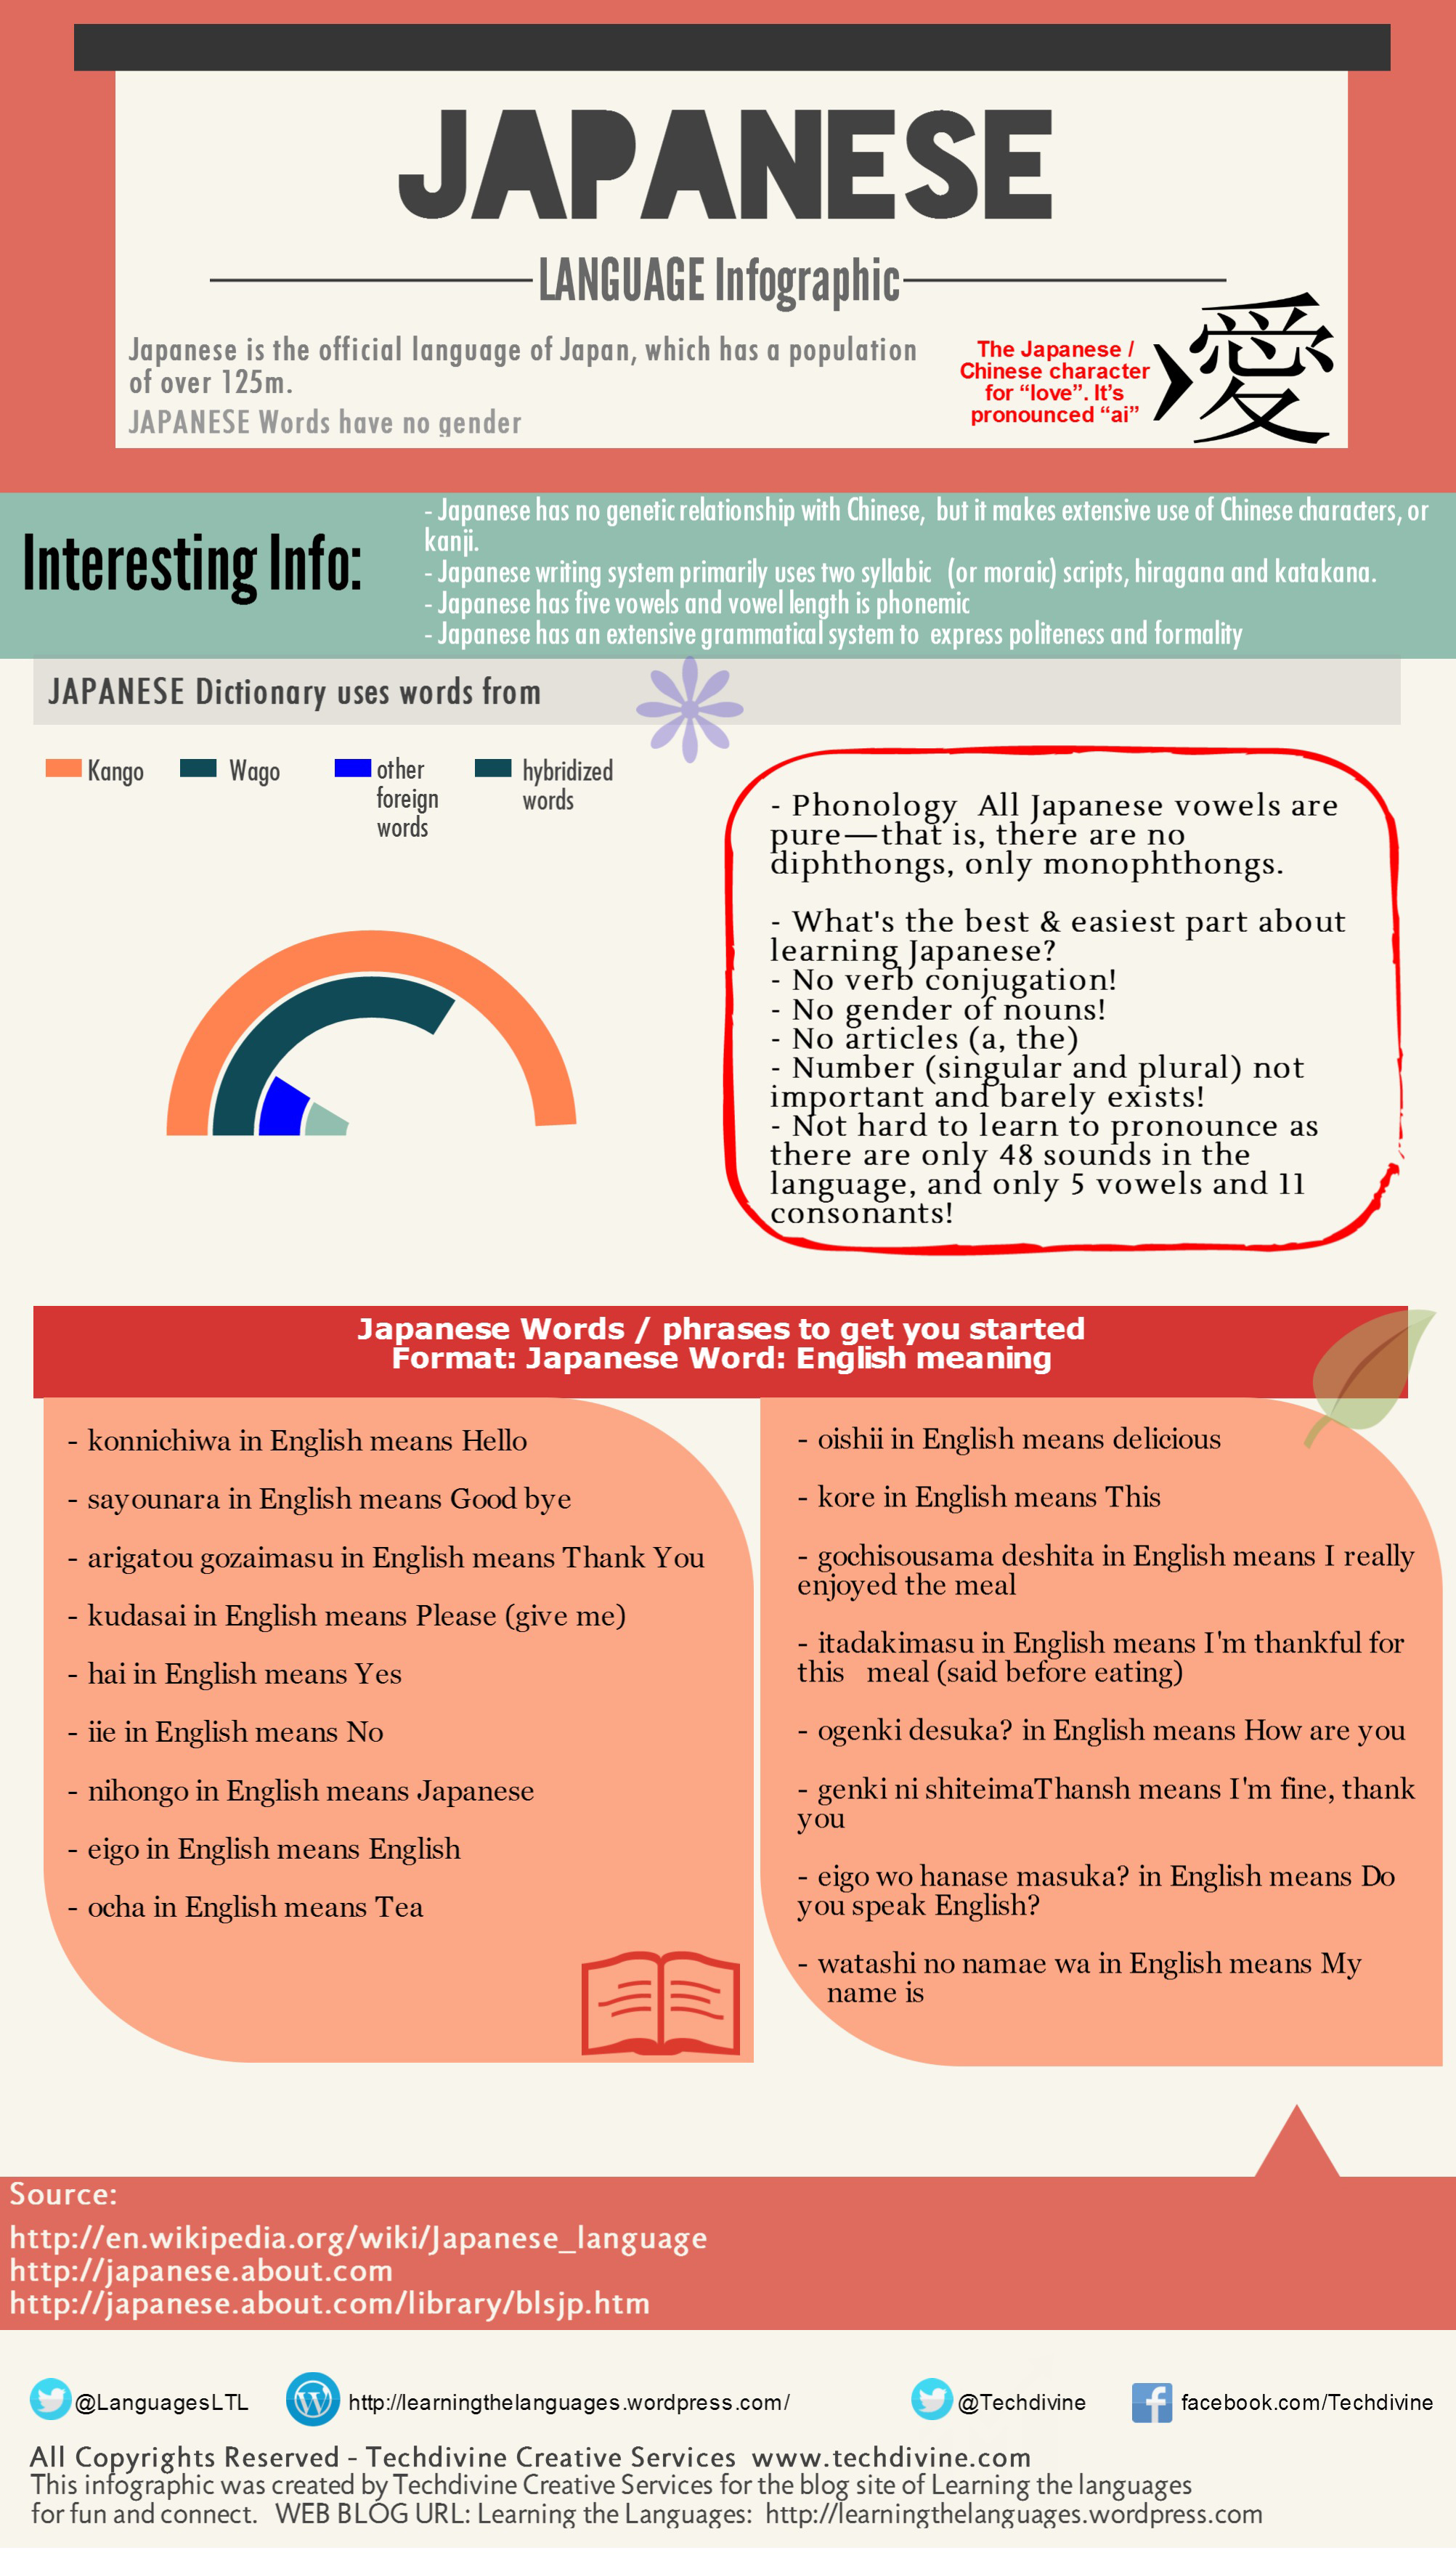 Learning Japanese language with infographics – Ananth V